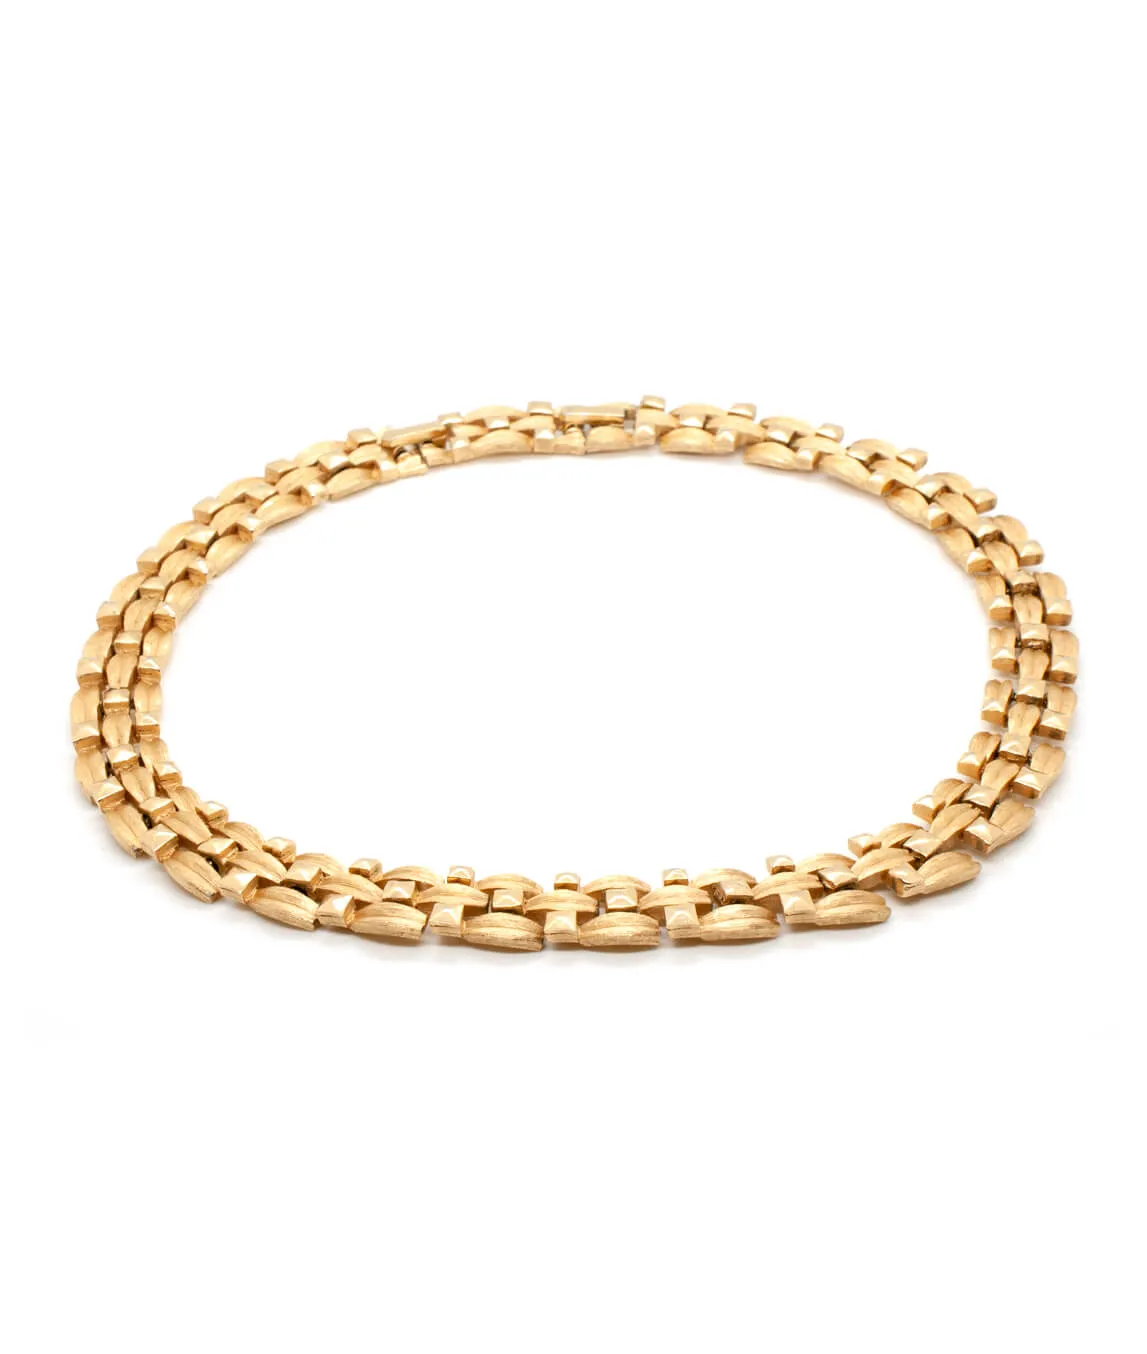 Crown Trifari gold-plated necklace